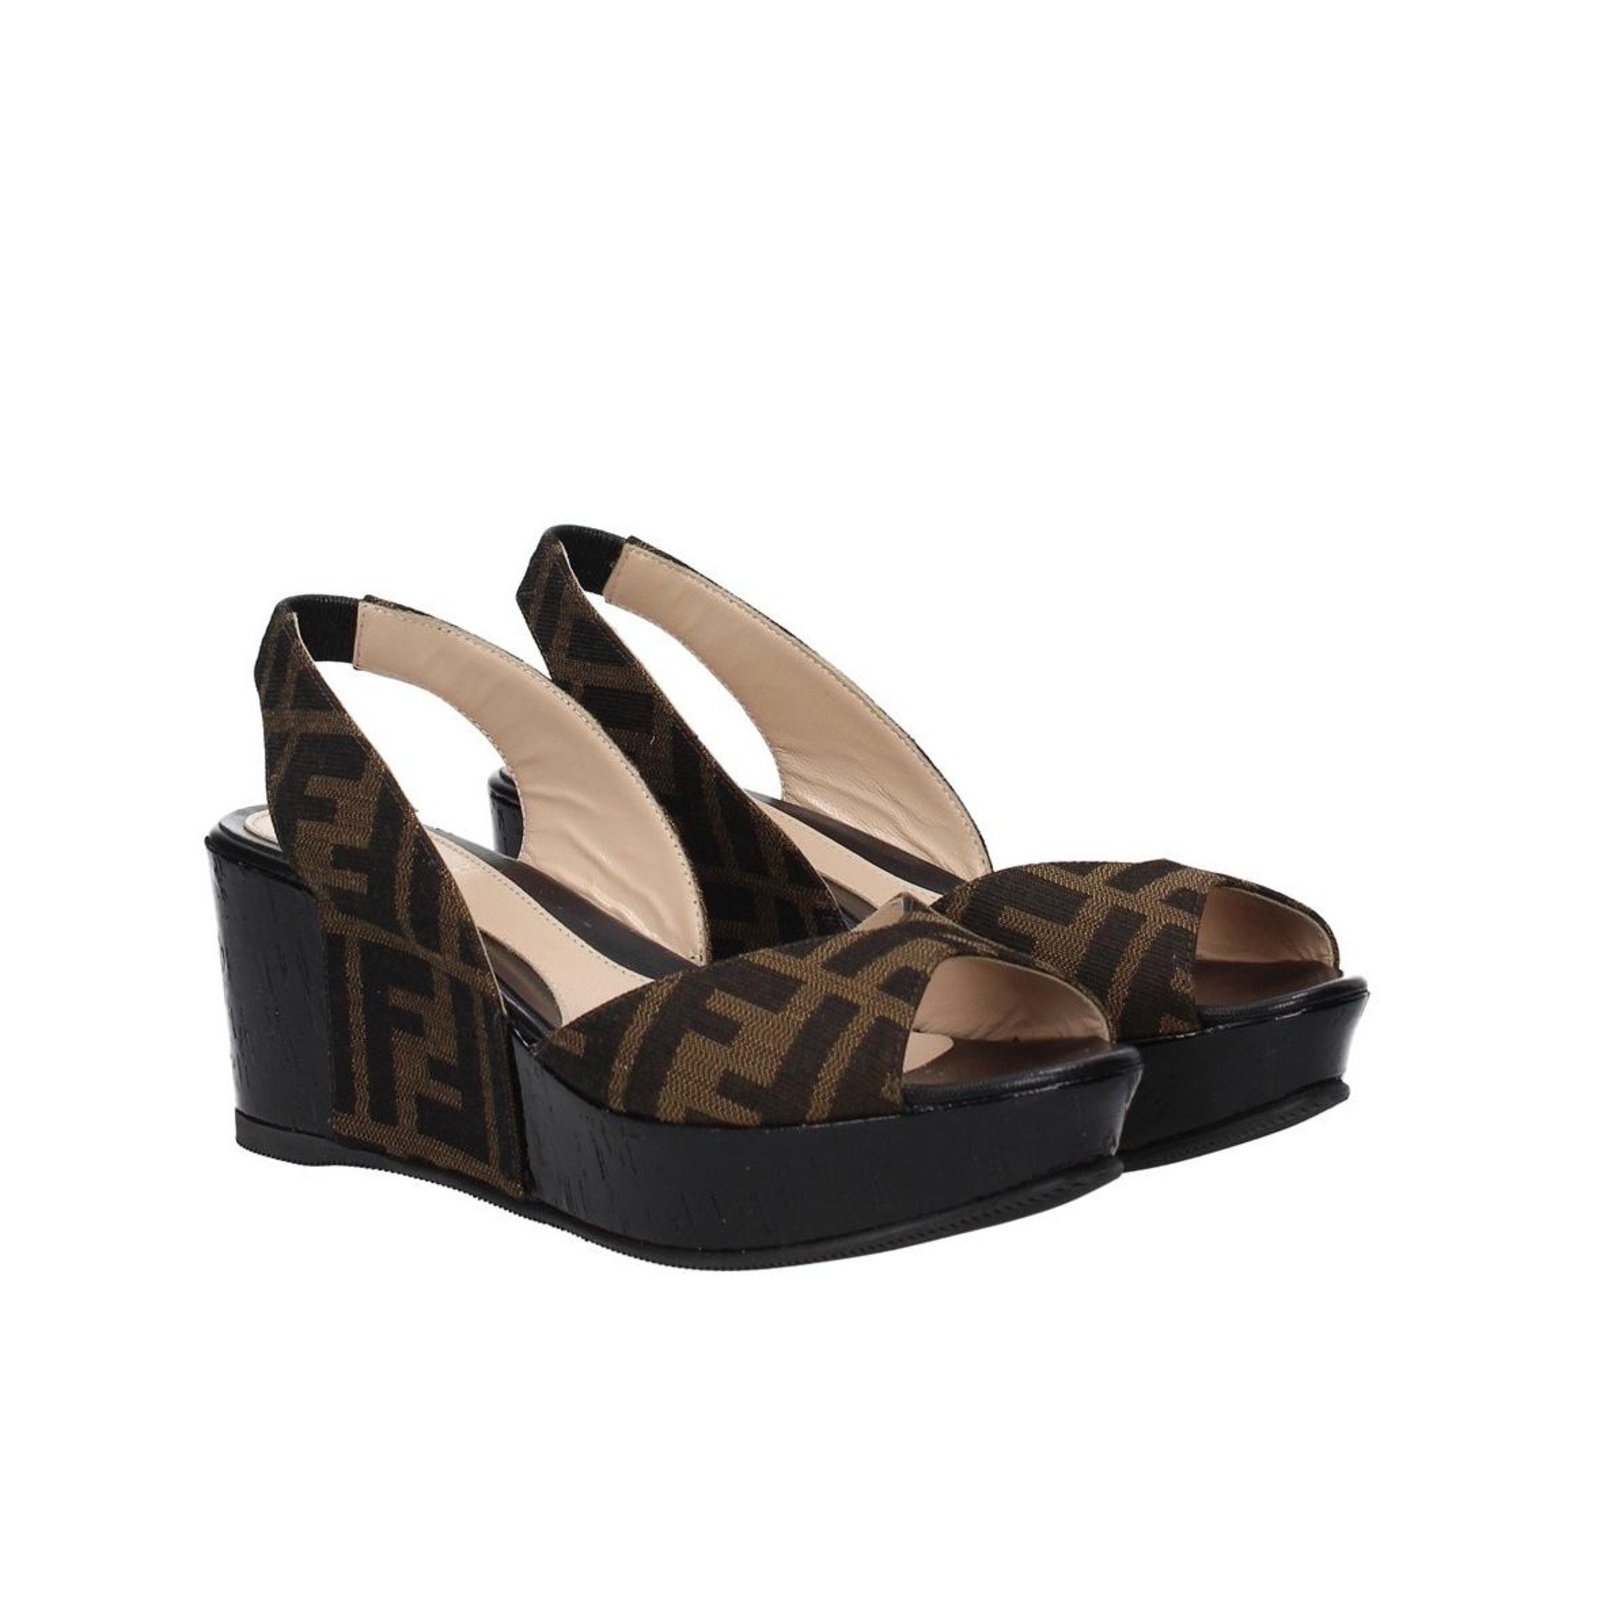 Fendi Wedges shoes Sandals Other Other 